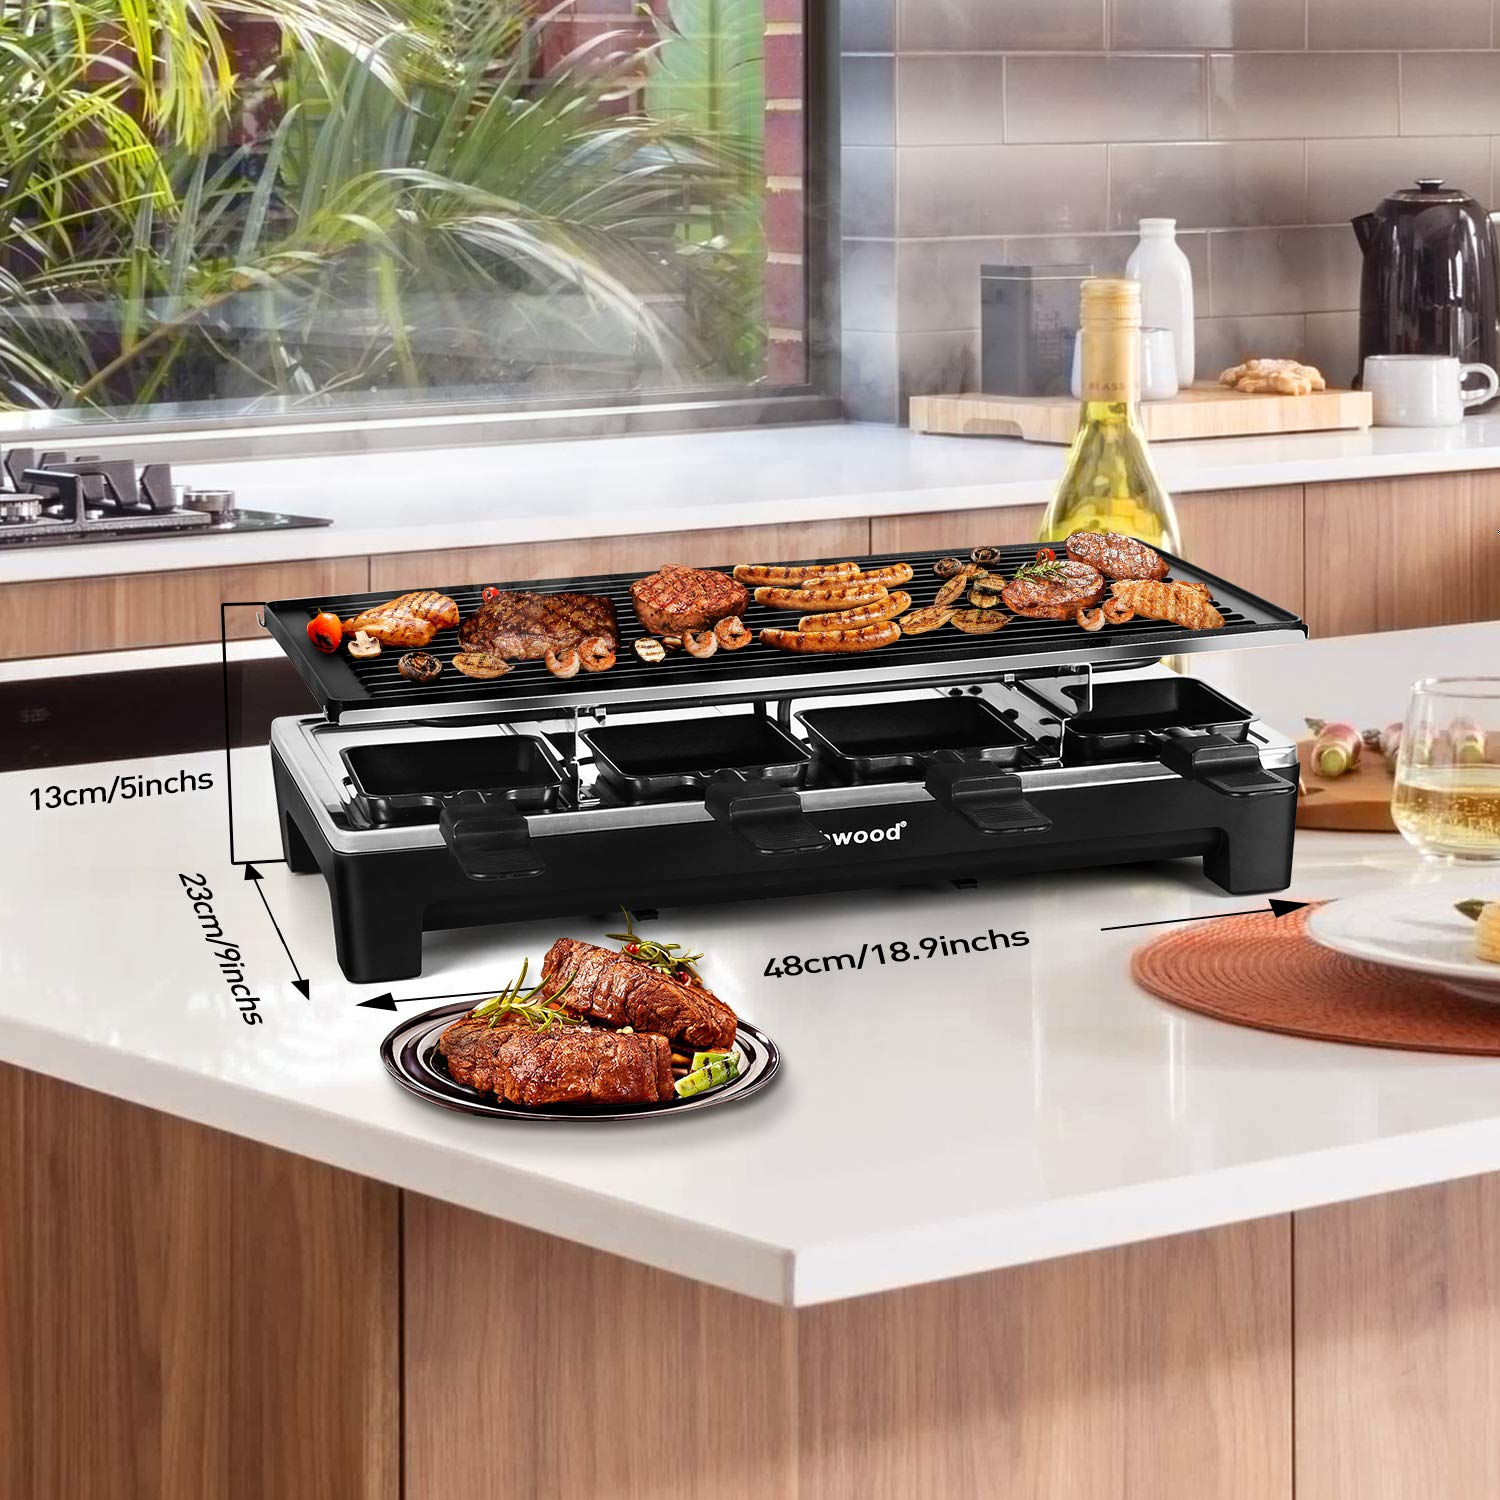 Techwood 1500W Indoor Table Grill with 8 Cheese Melting Pans(Black)